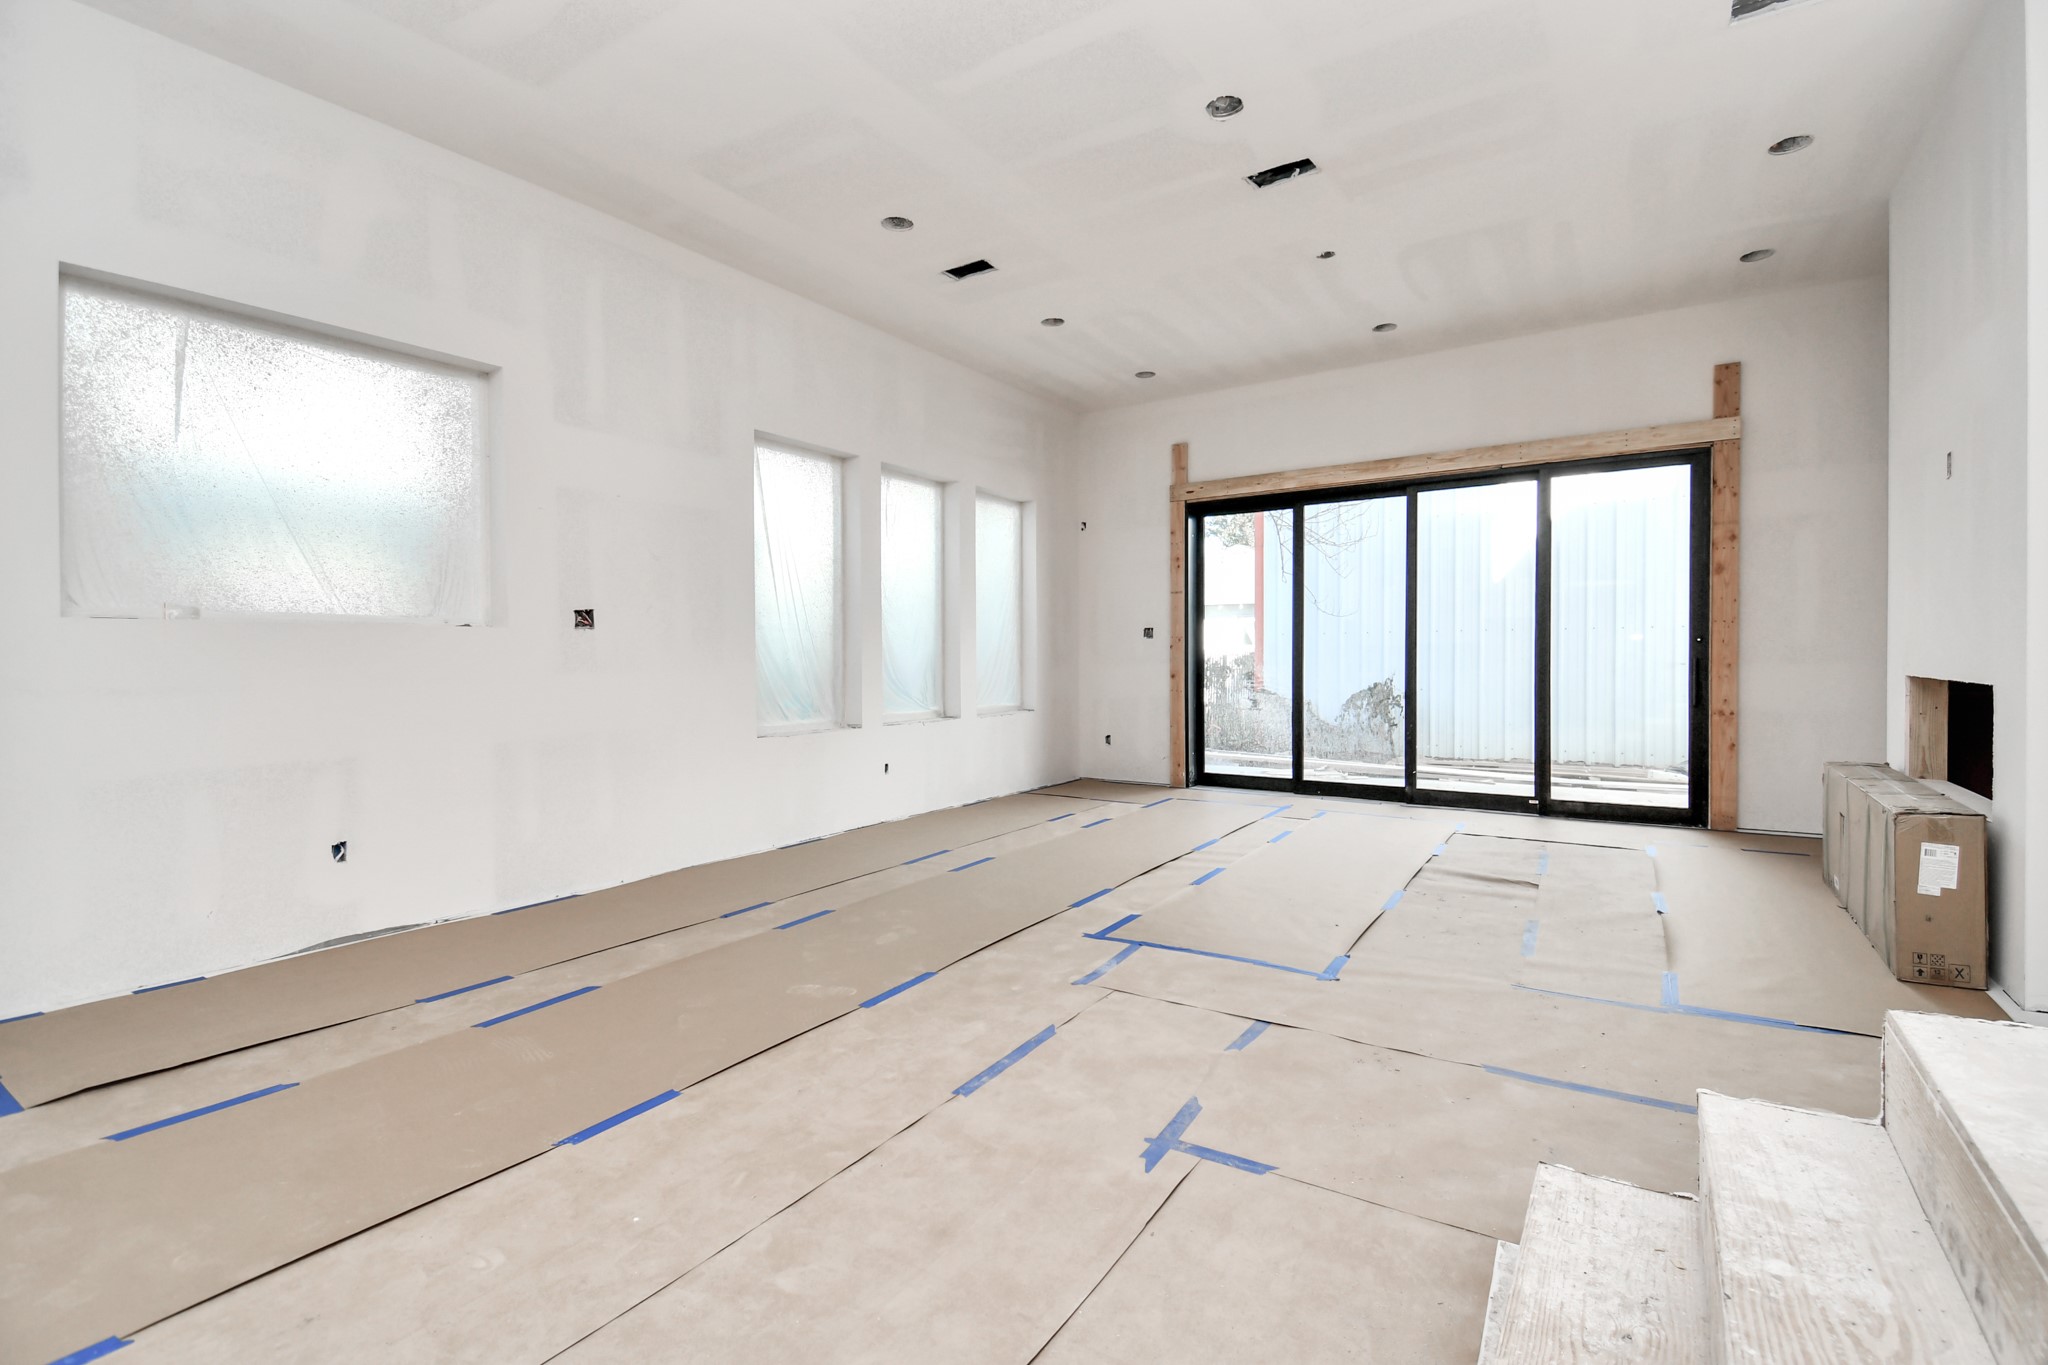 Another view of the spacious floor living.